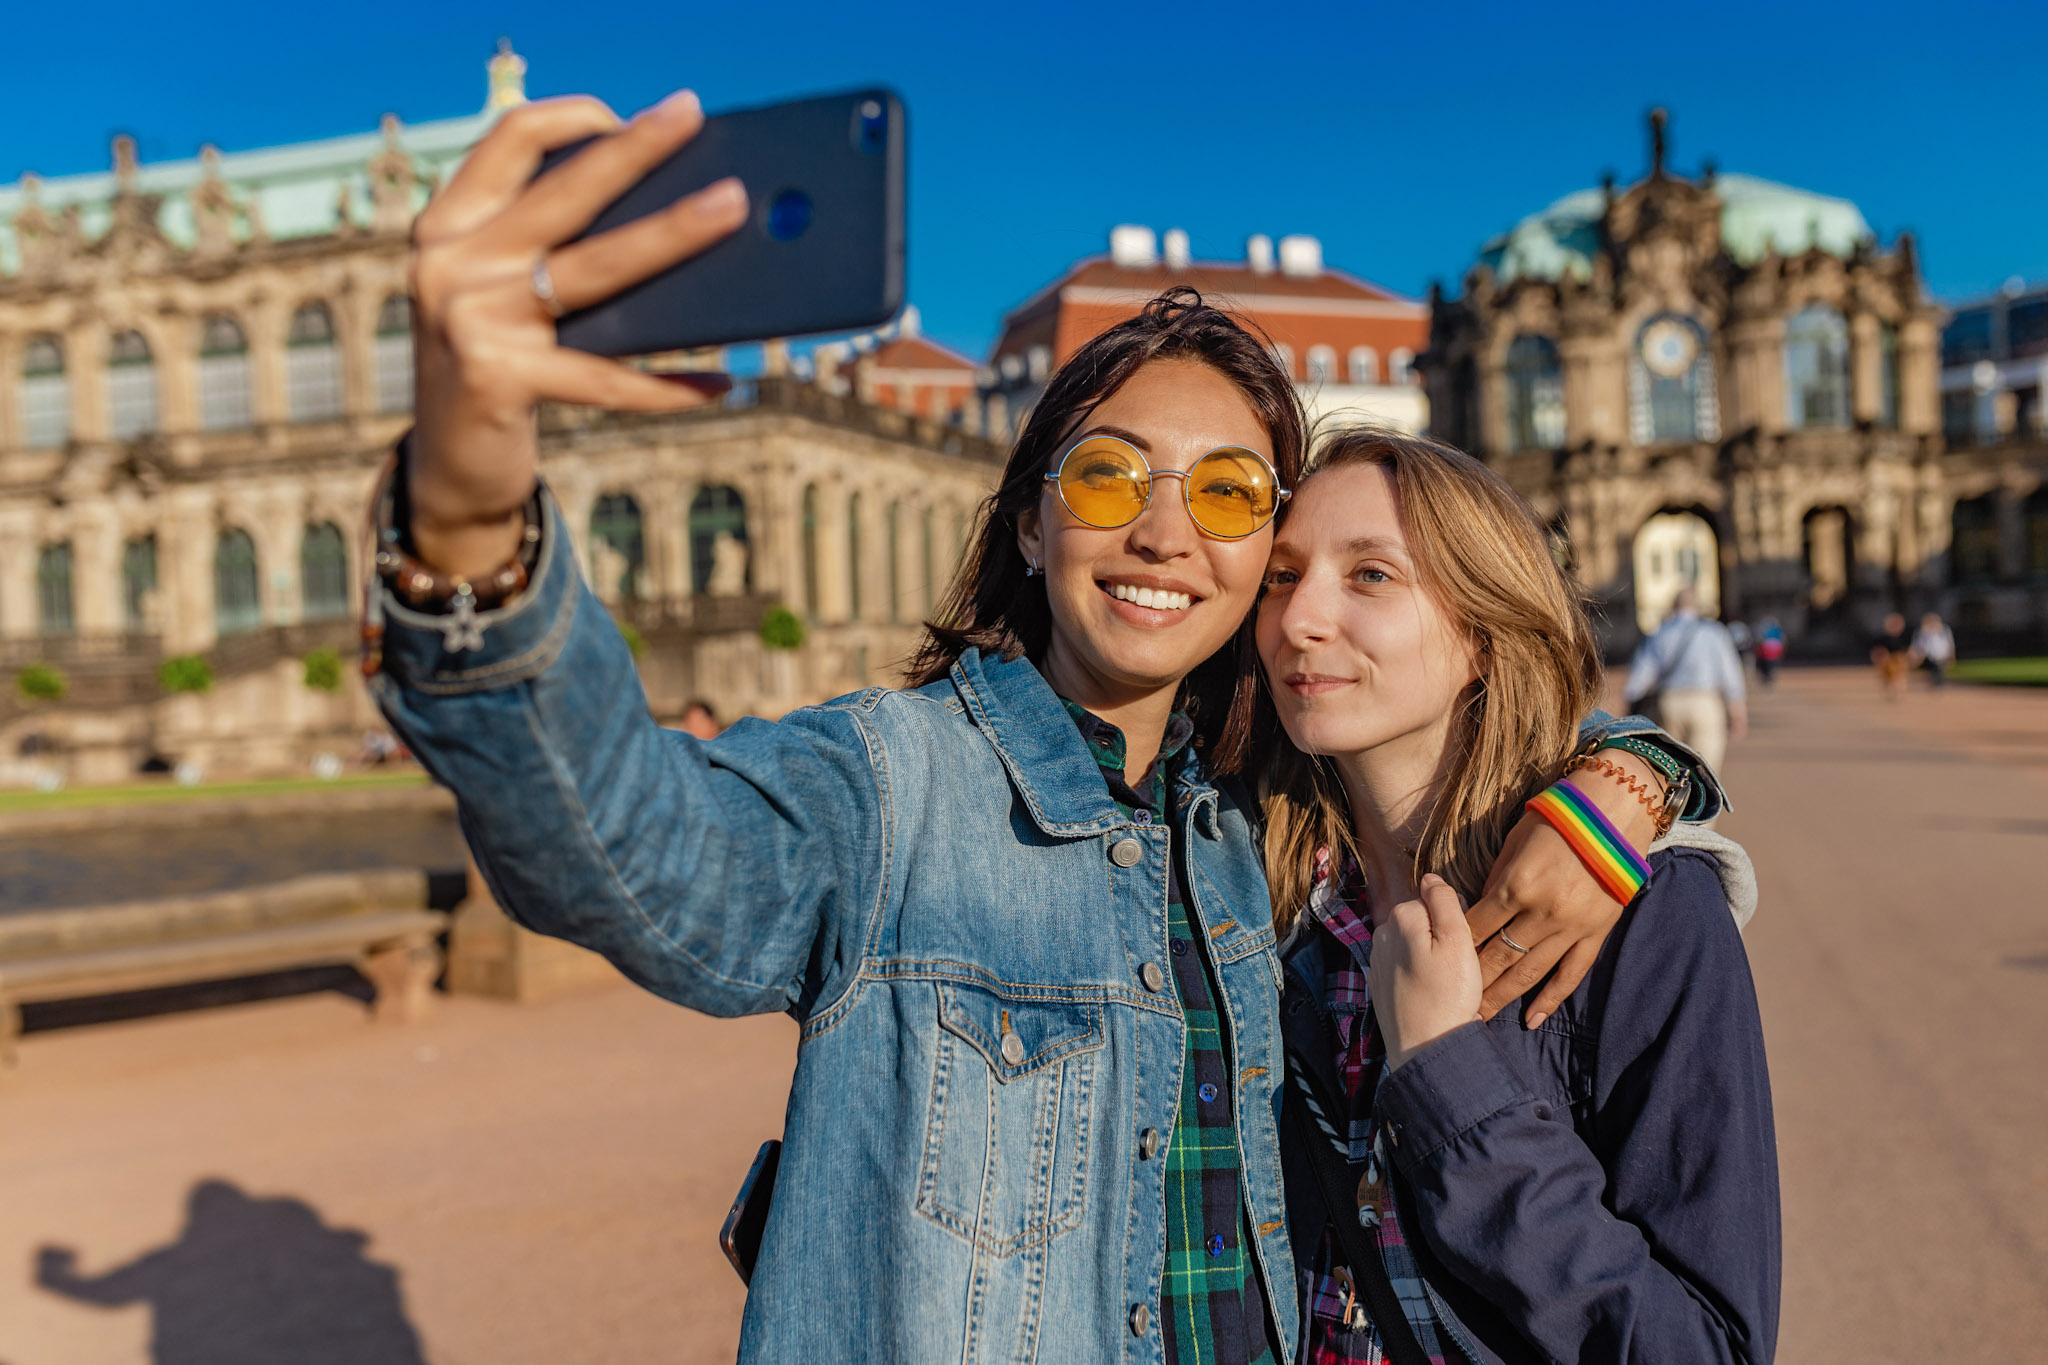 stock photo of a lgbti couple using a smartphone to take a selfie while on holiday